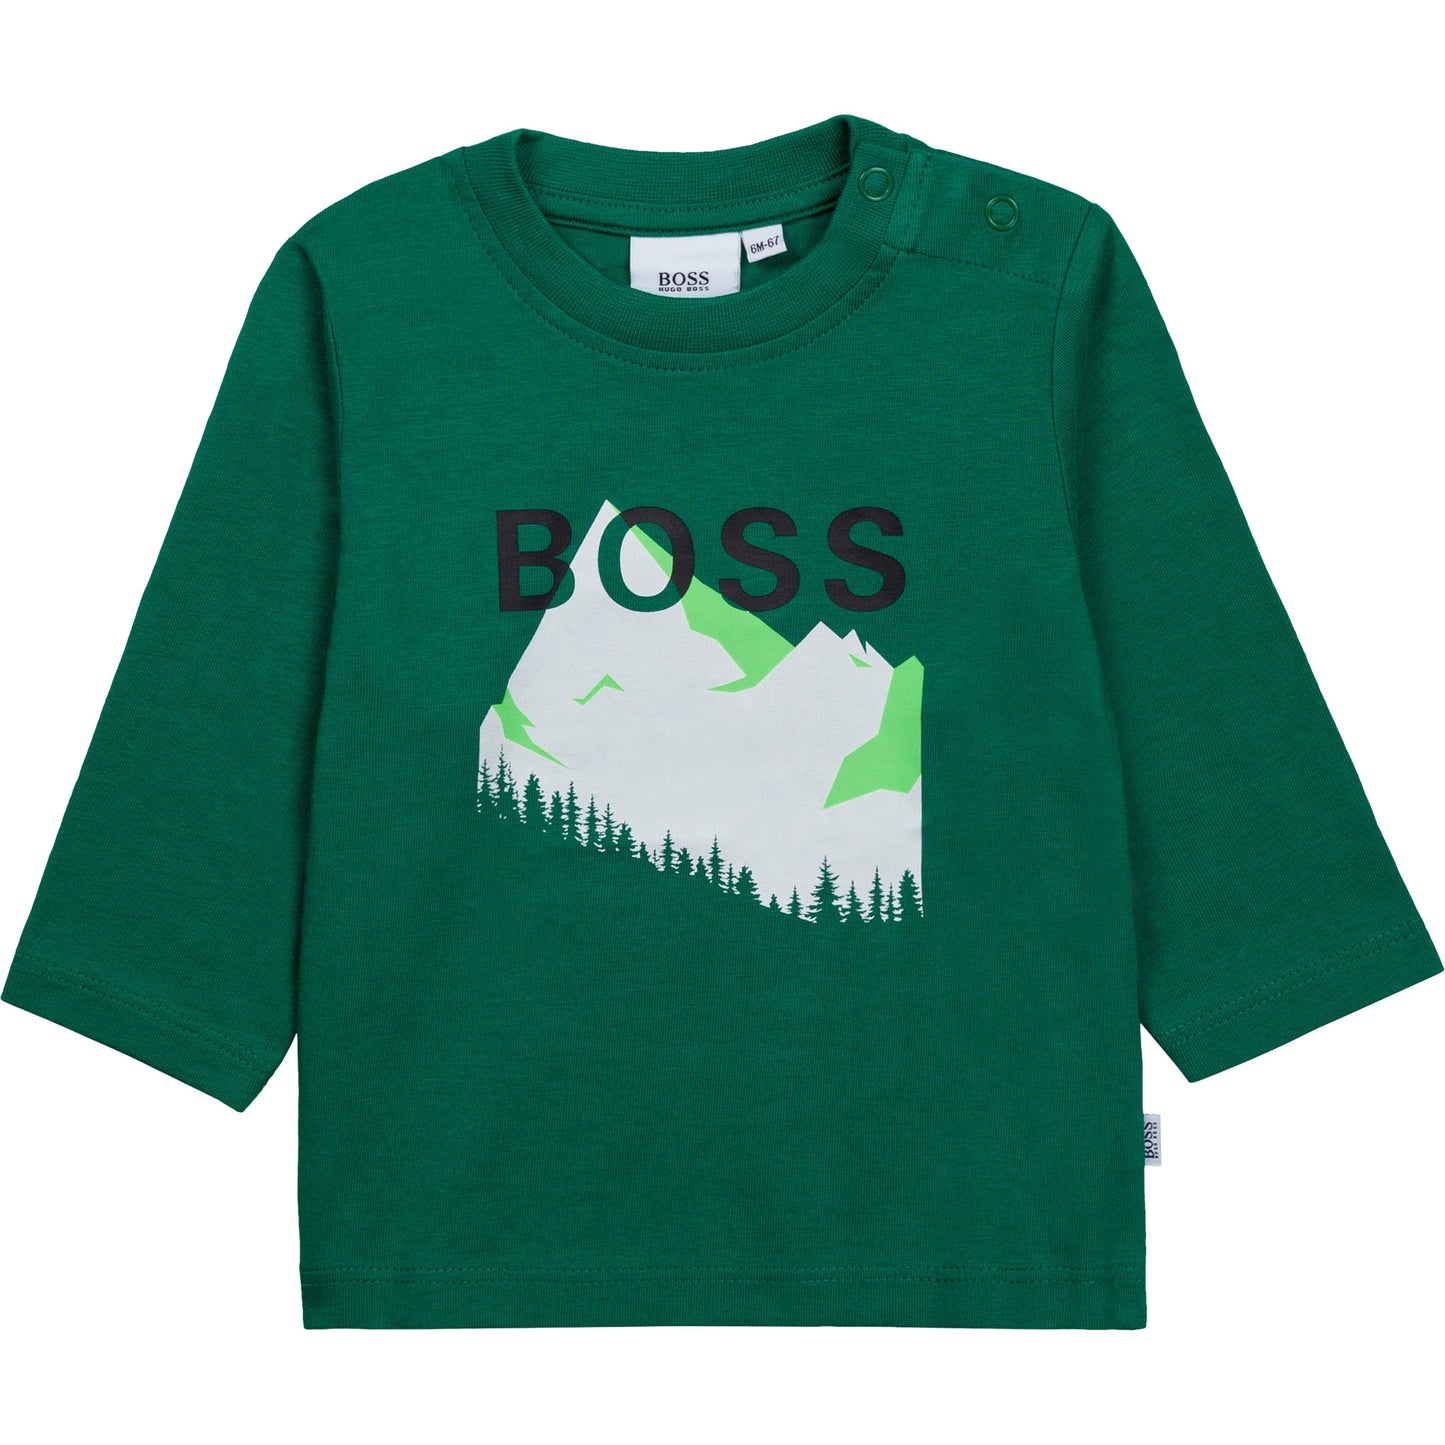 Hugo Boss Toddler Boys Ls T-Shirt With Graphic J05905